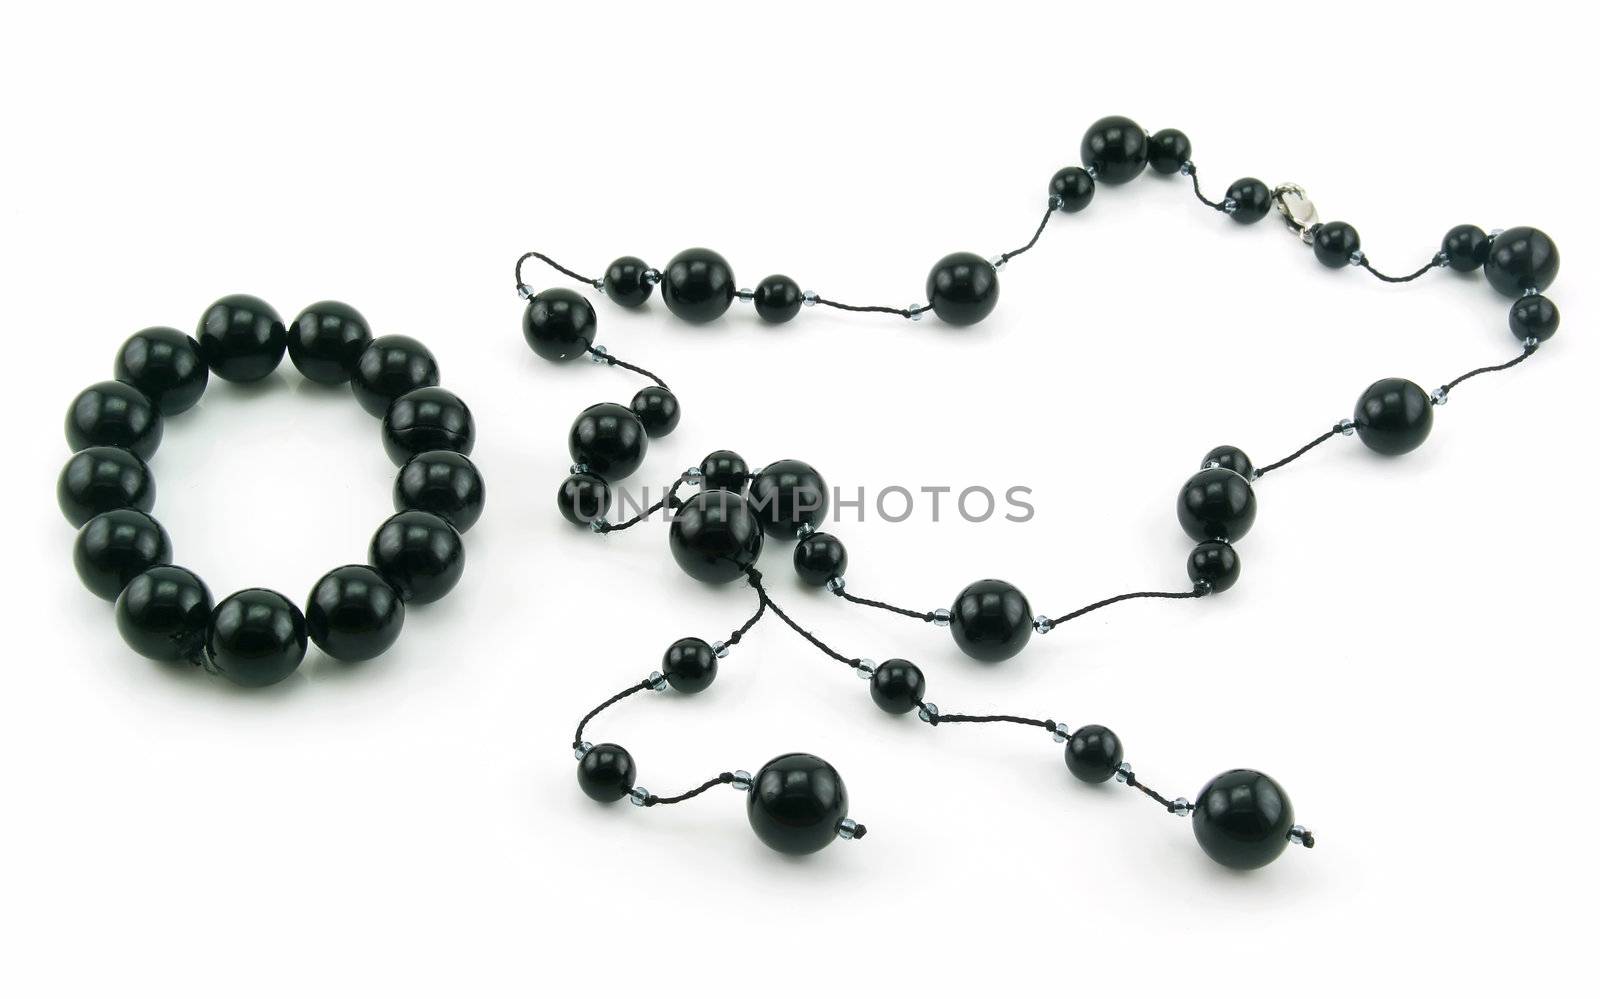 Black Pearl Bracelet and Necklace Isolated on White Background